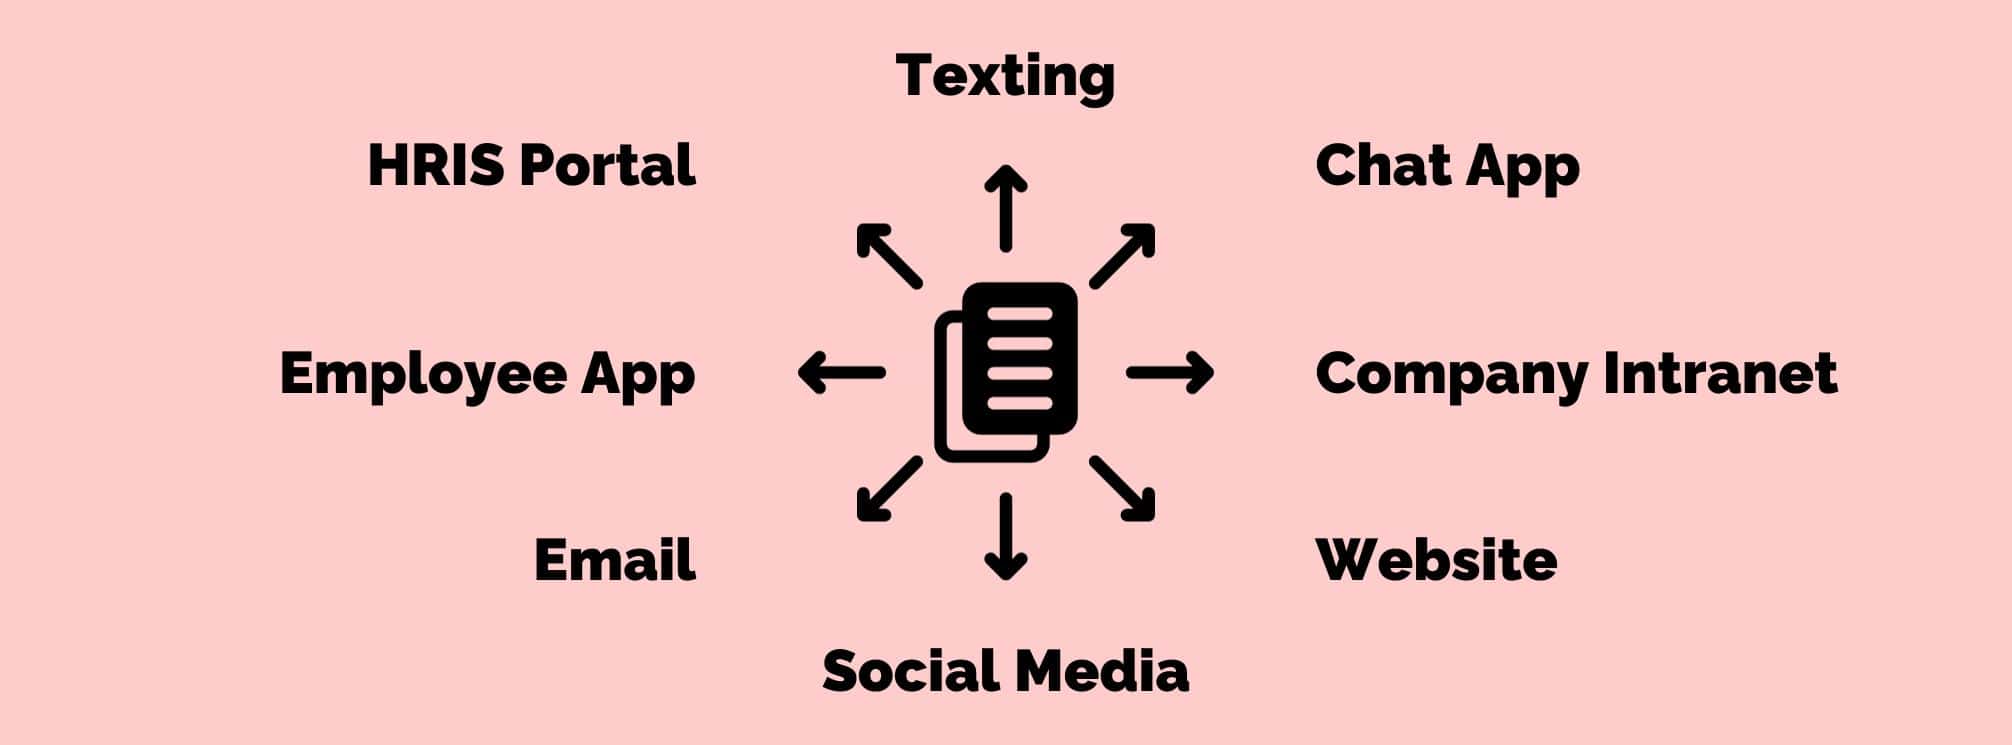 Content distribution graphic with an icon of documents with arrows pointing to major internal comms channels like email, apps, and intranets.